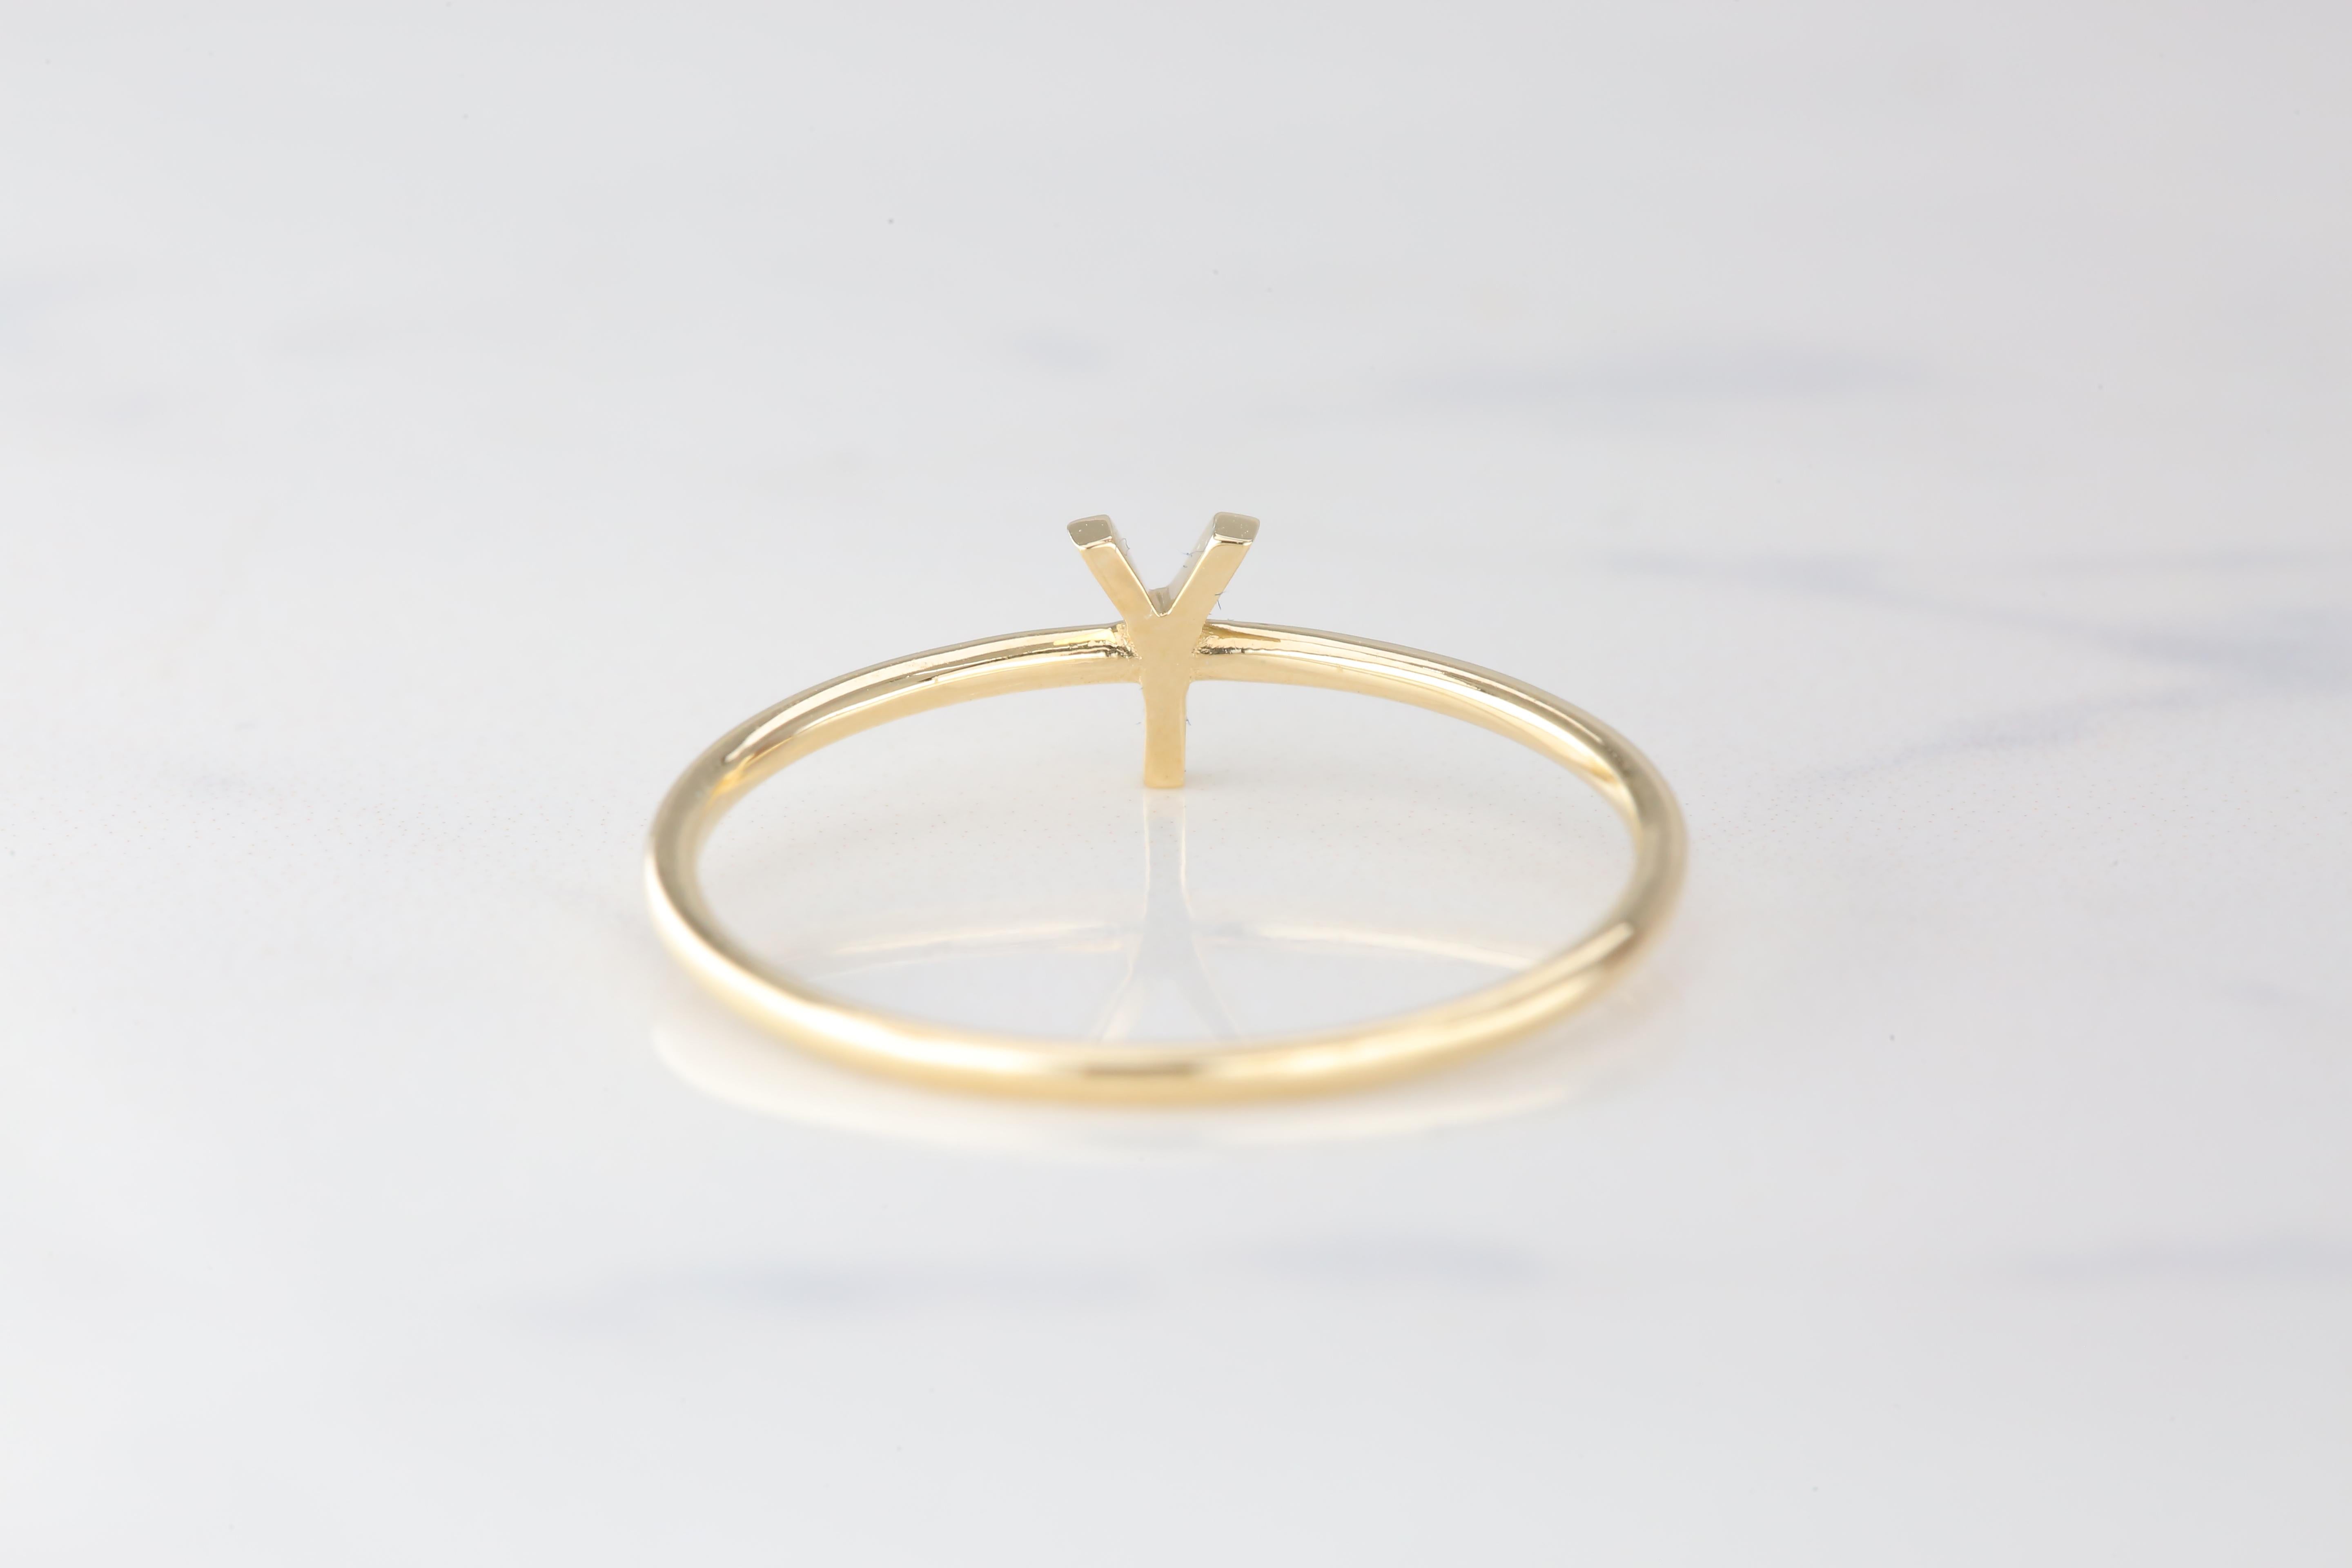 For Sale:  14K Gold Initial Y Letter Ring, Personalized Initial Letter Ring 5